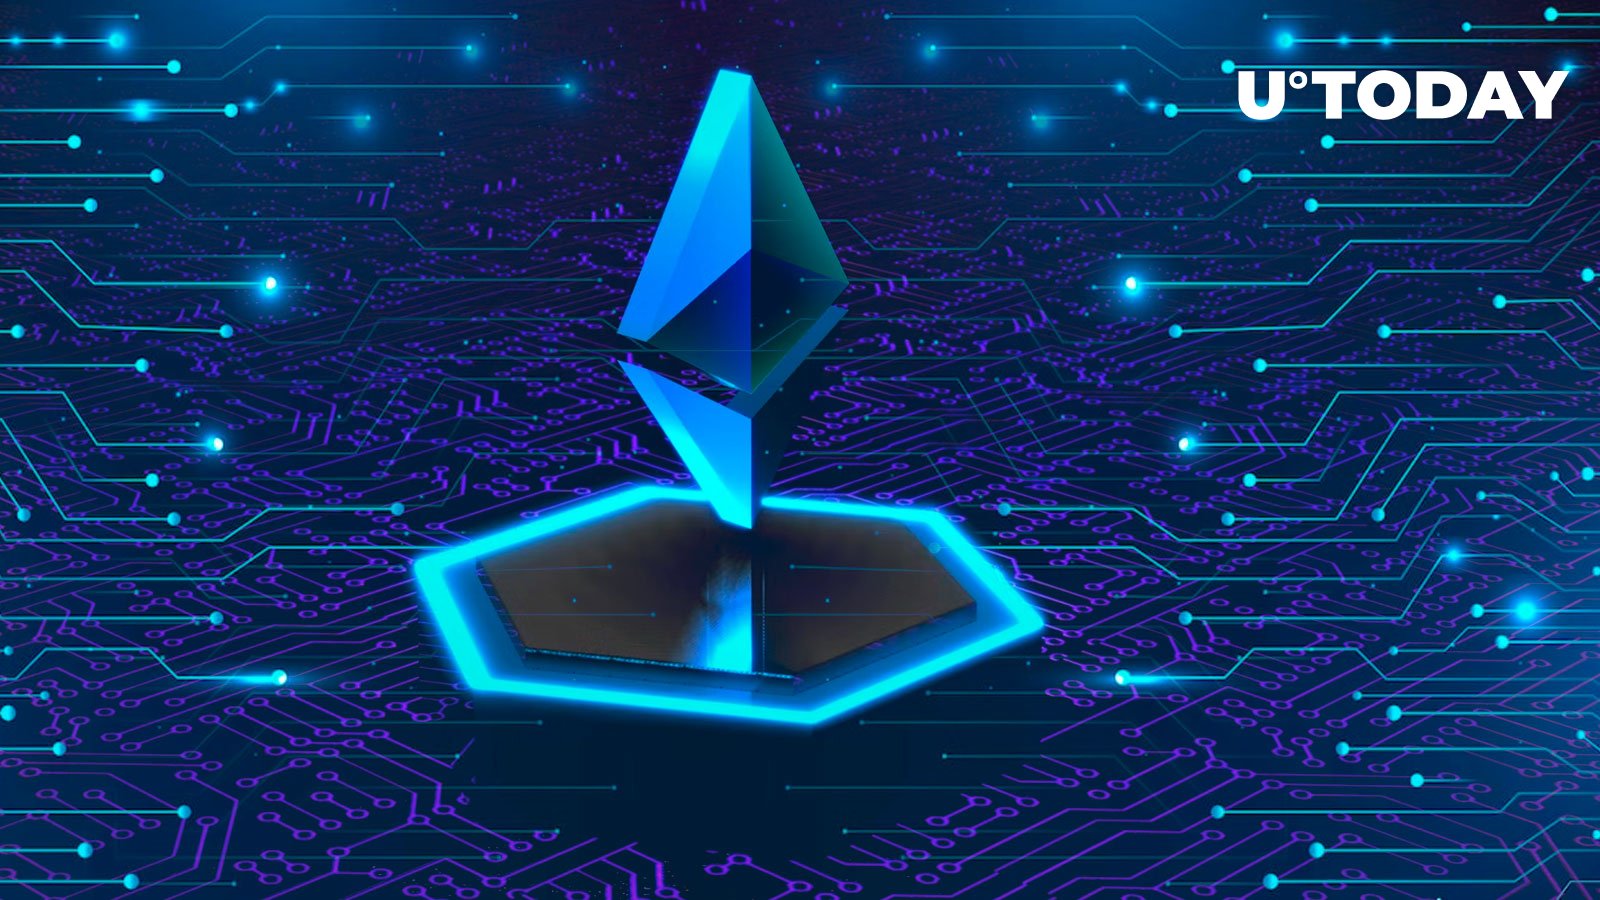 Ethereum Price Soars as “Merge” Upgrade Comes Even Closer